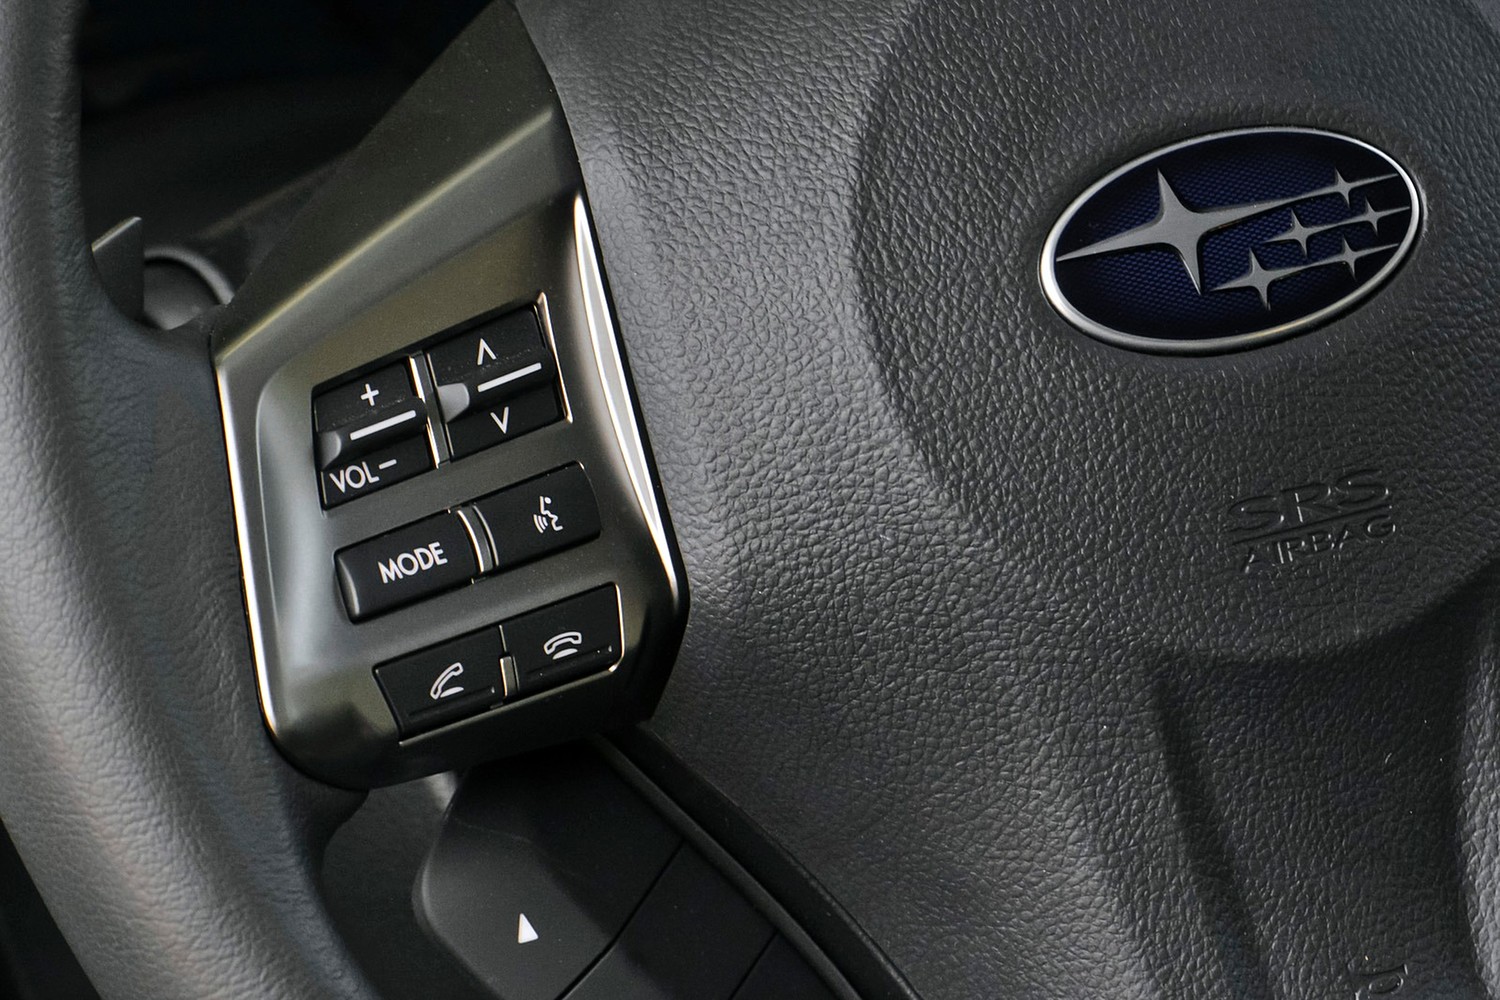 Subaru Forester 2.0XT Touring 4dr SUV Steering Wheel Detail (2015 model year shown)